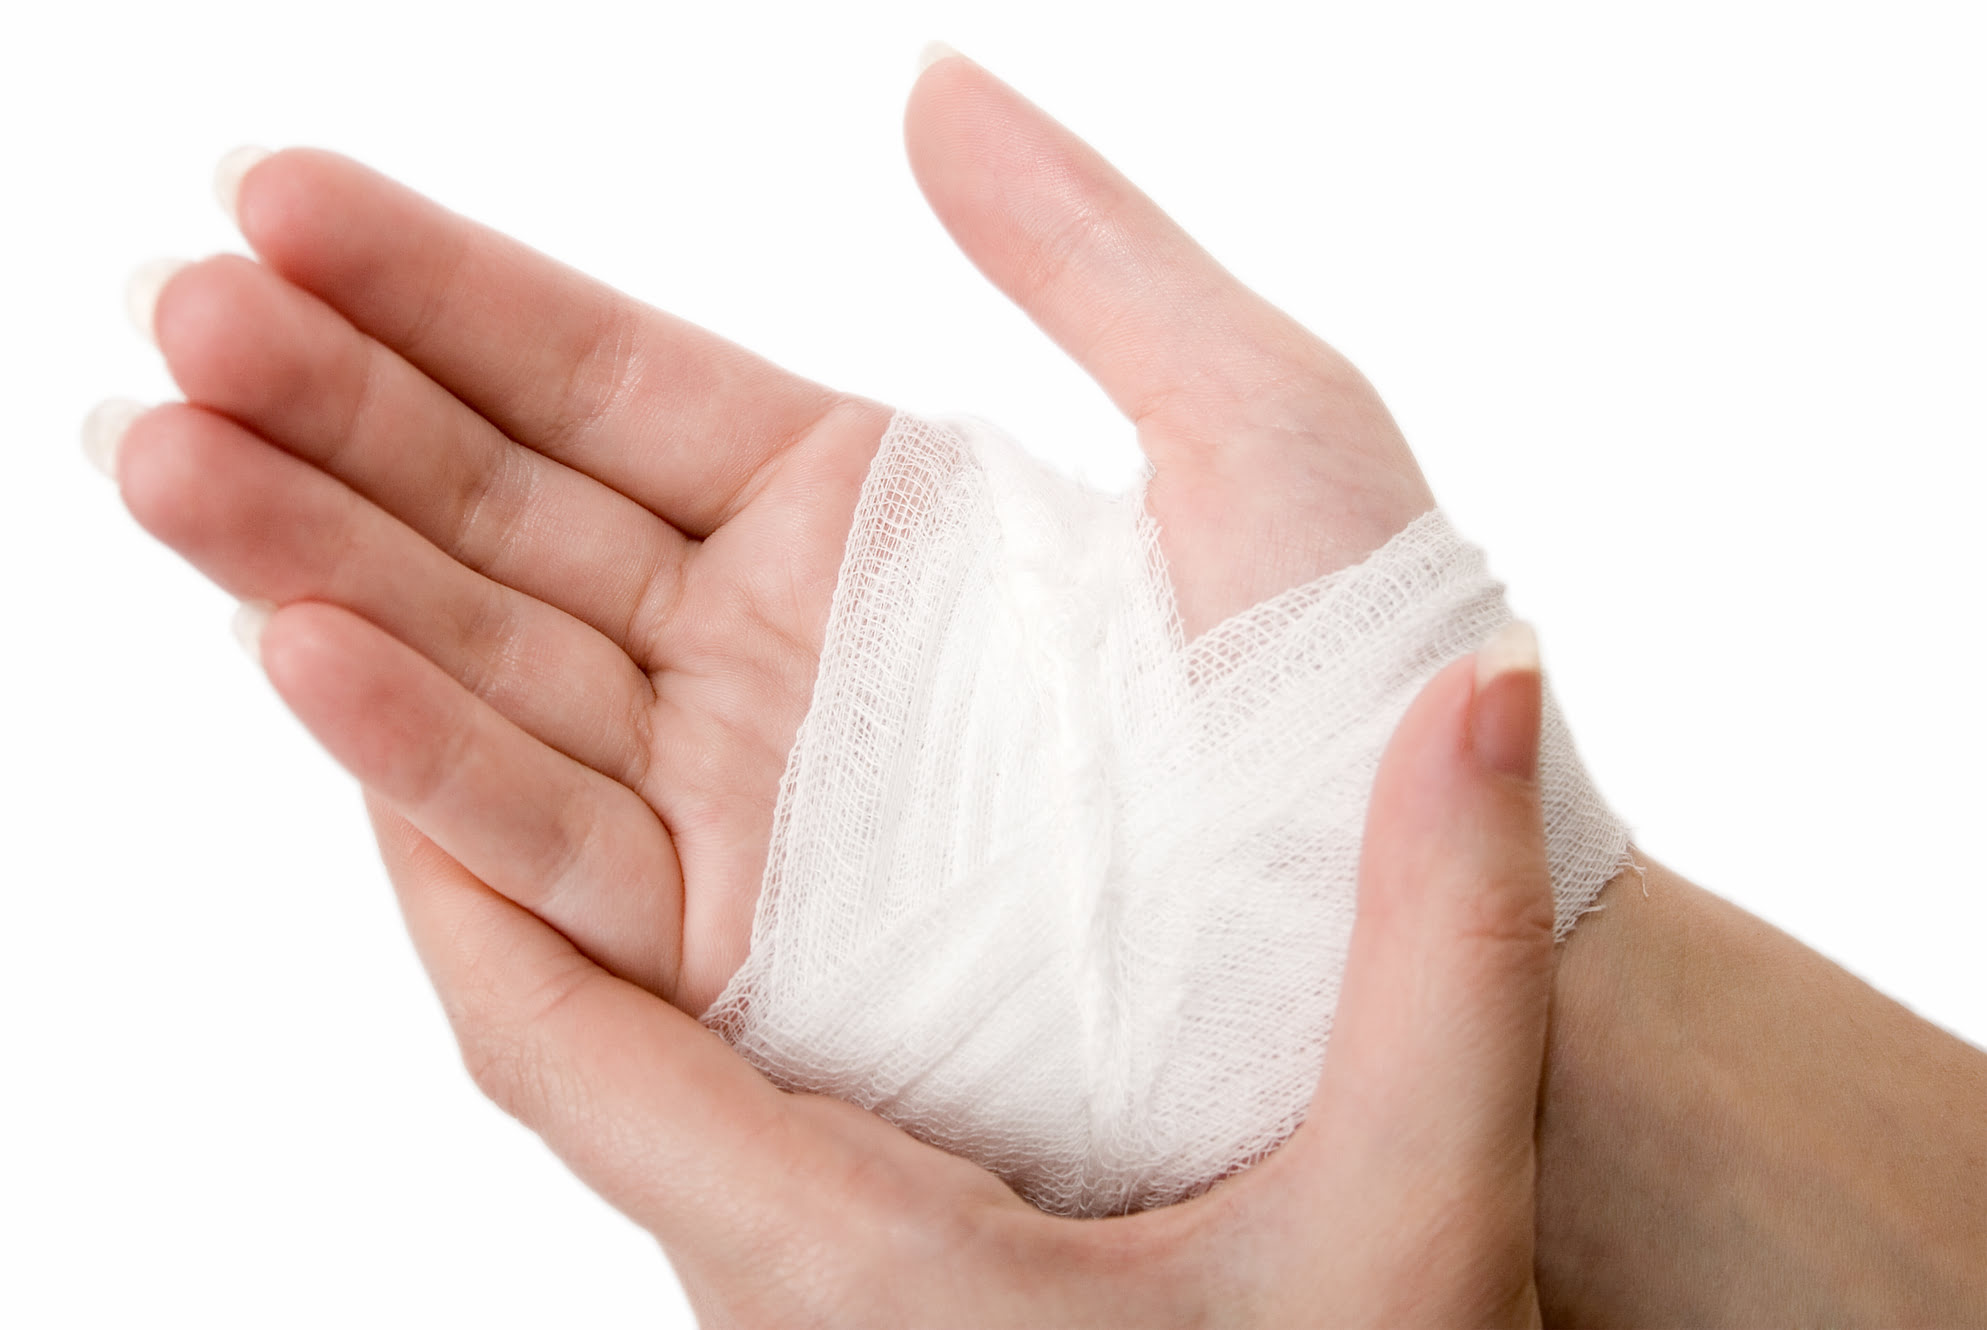 What Is Gauze Used For In A First Aid Kit